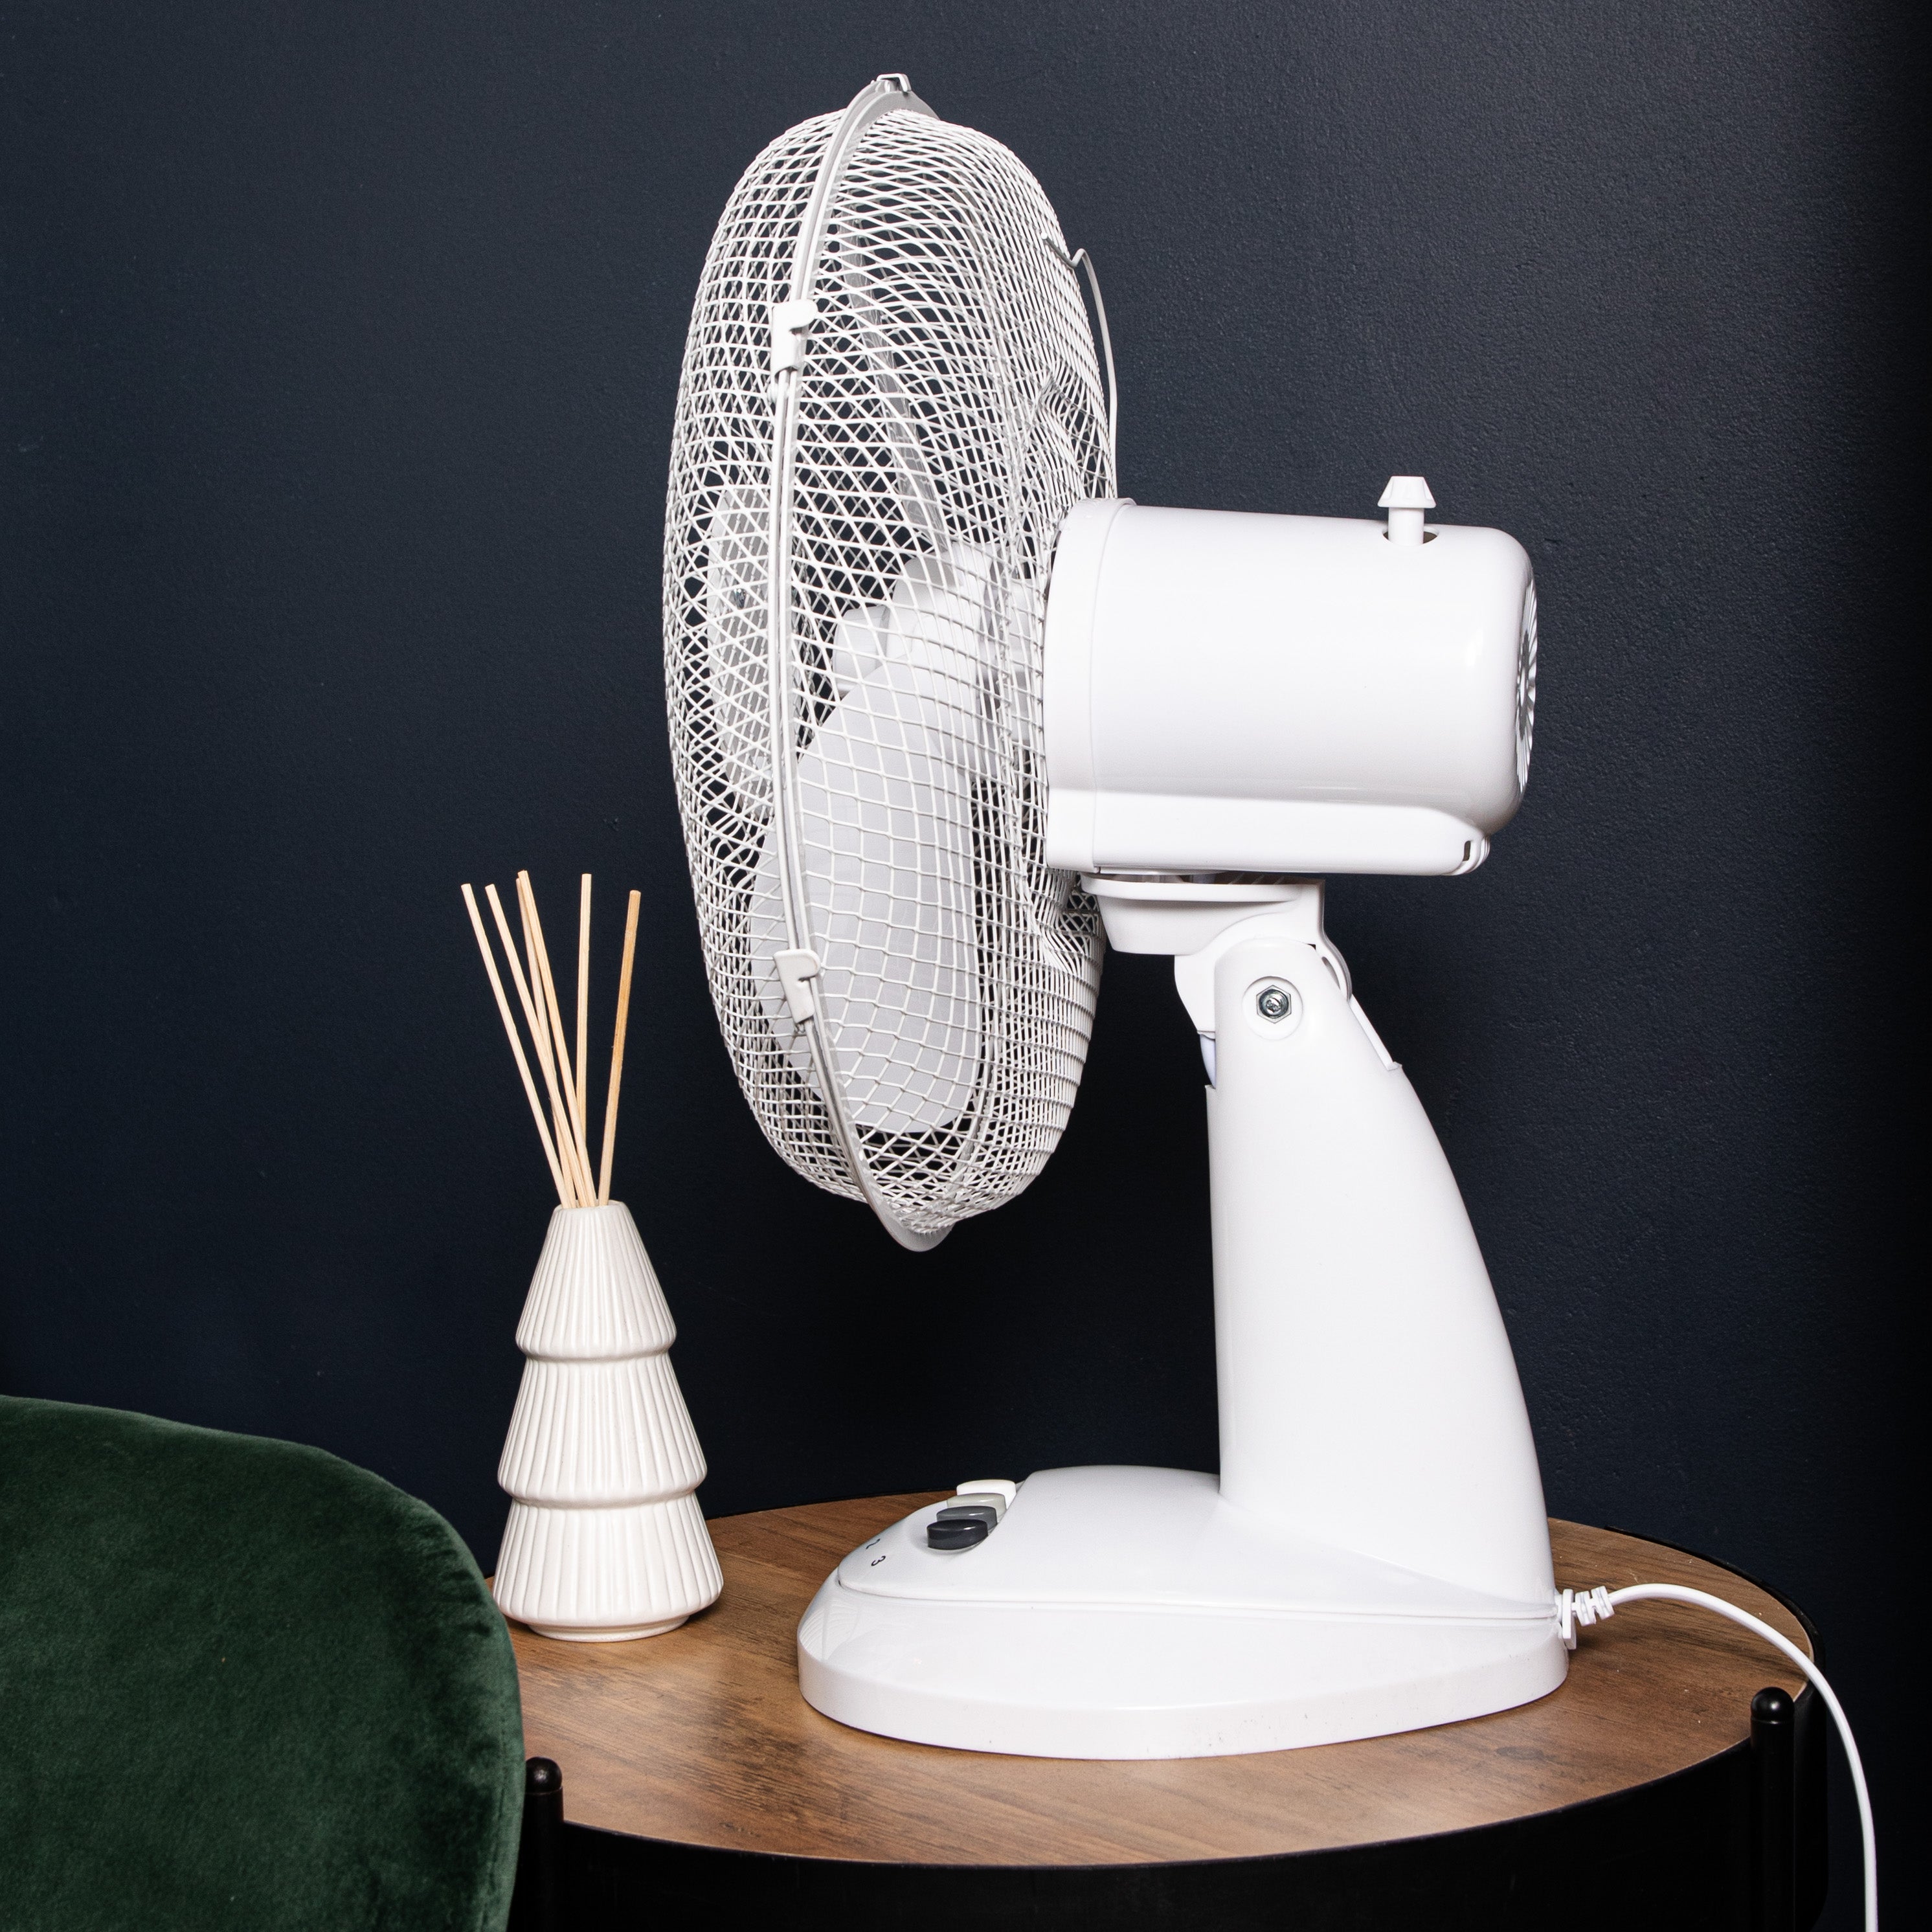 30cm Indoor Oscillating Electric Cooling Table Desk Fan in White